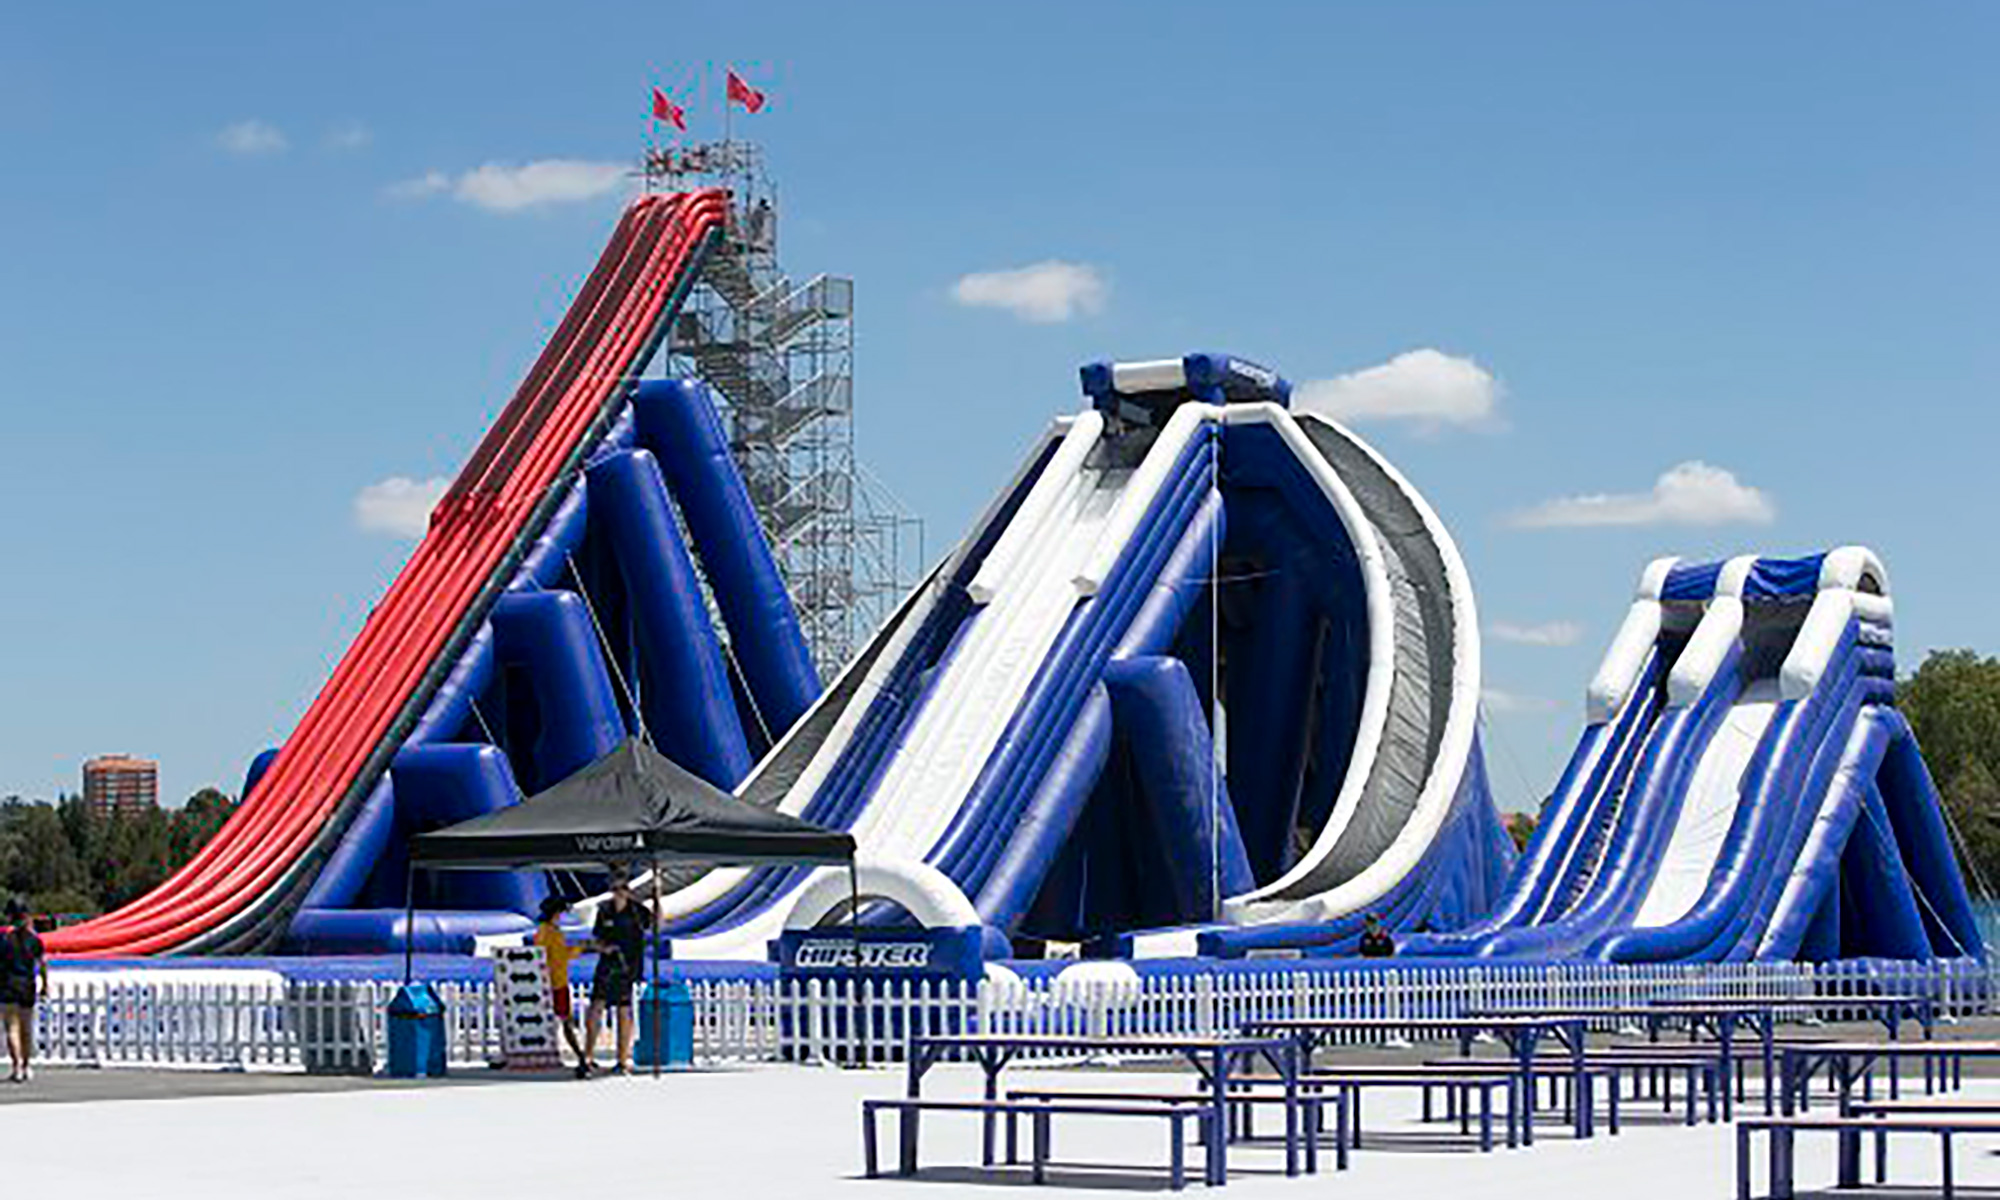 Scaffolding the World's tallest inflatable waterslide Layher. The